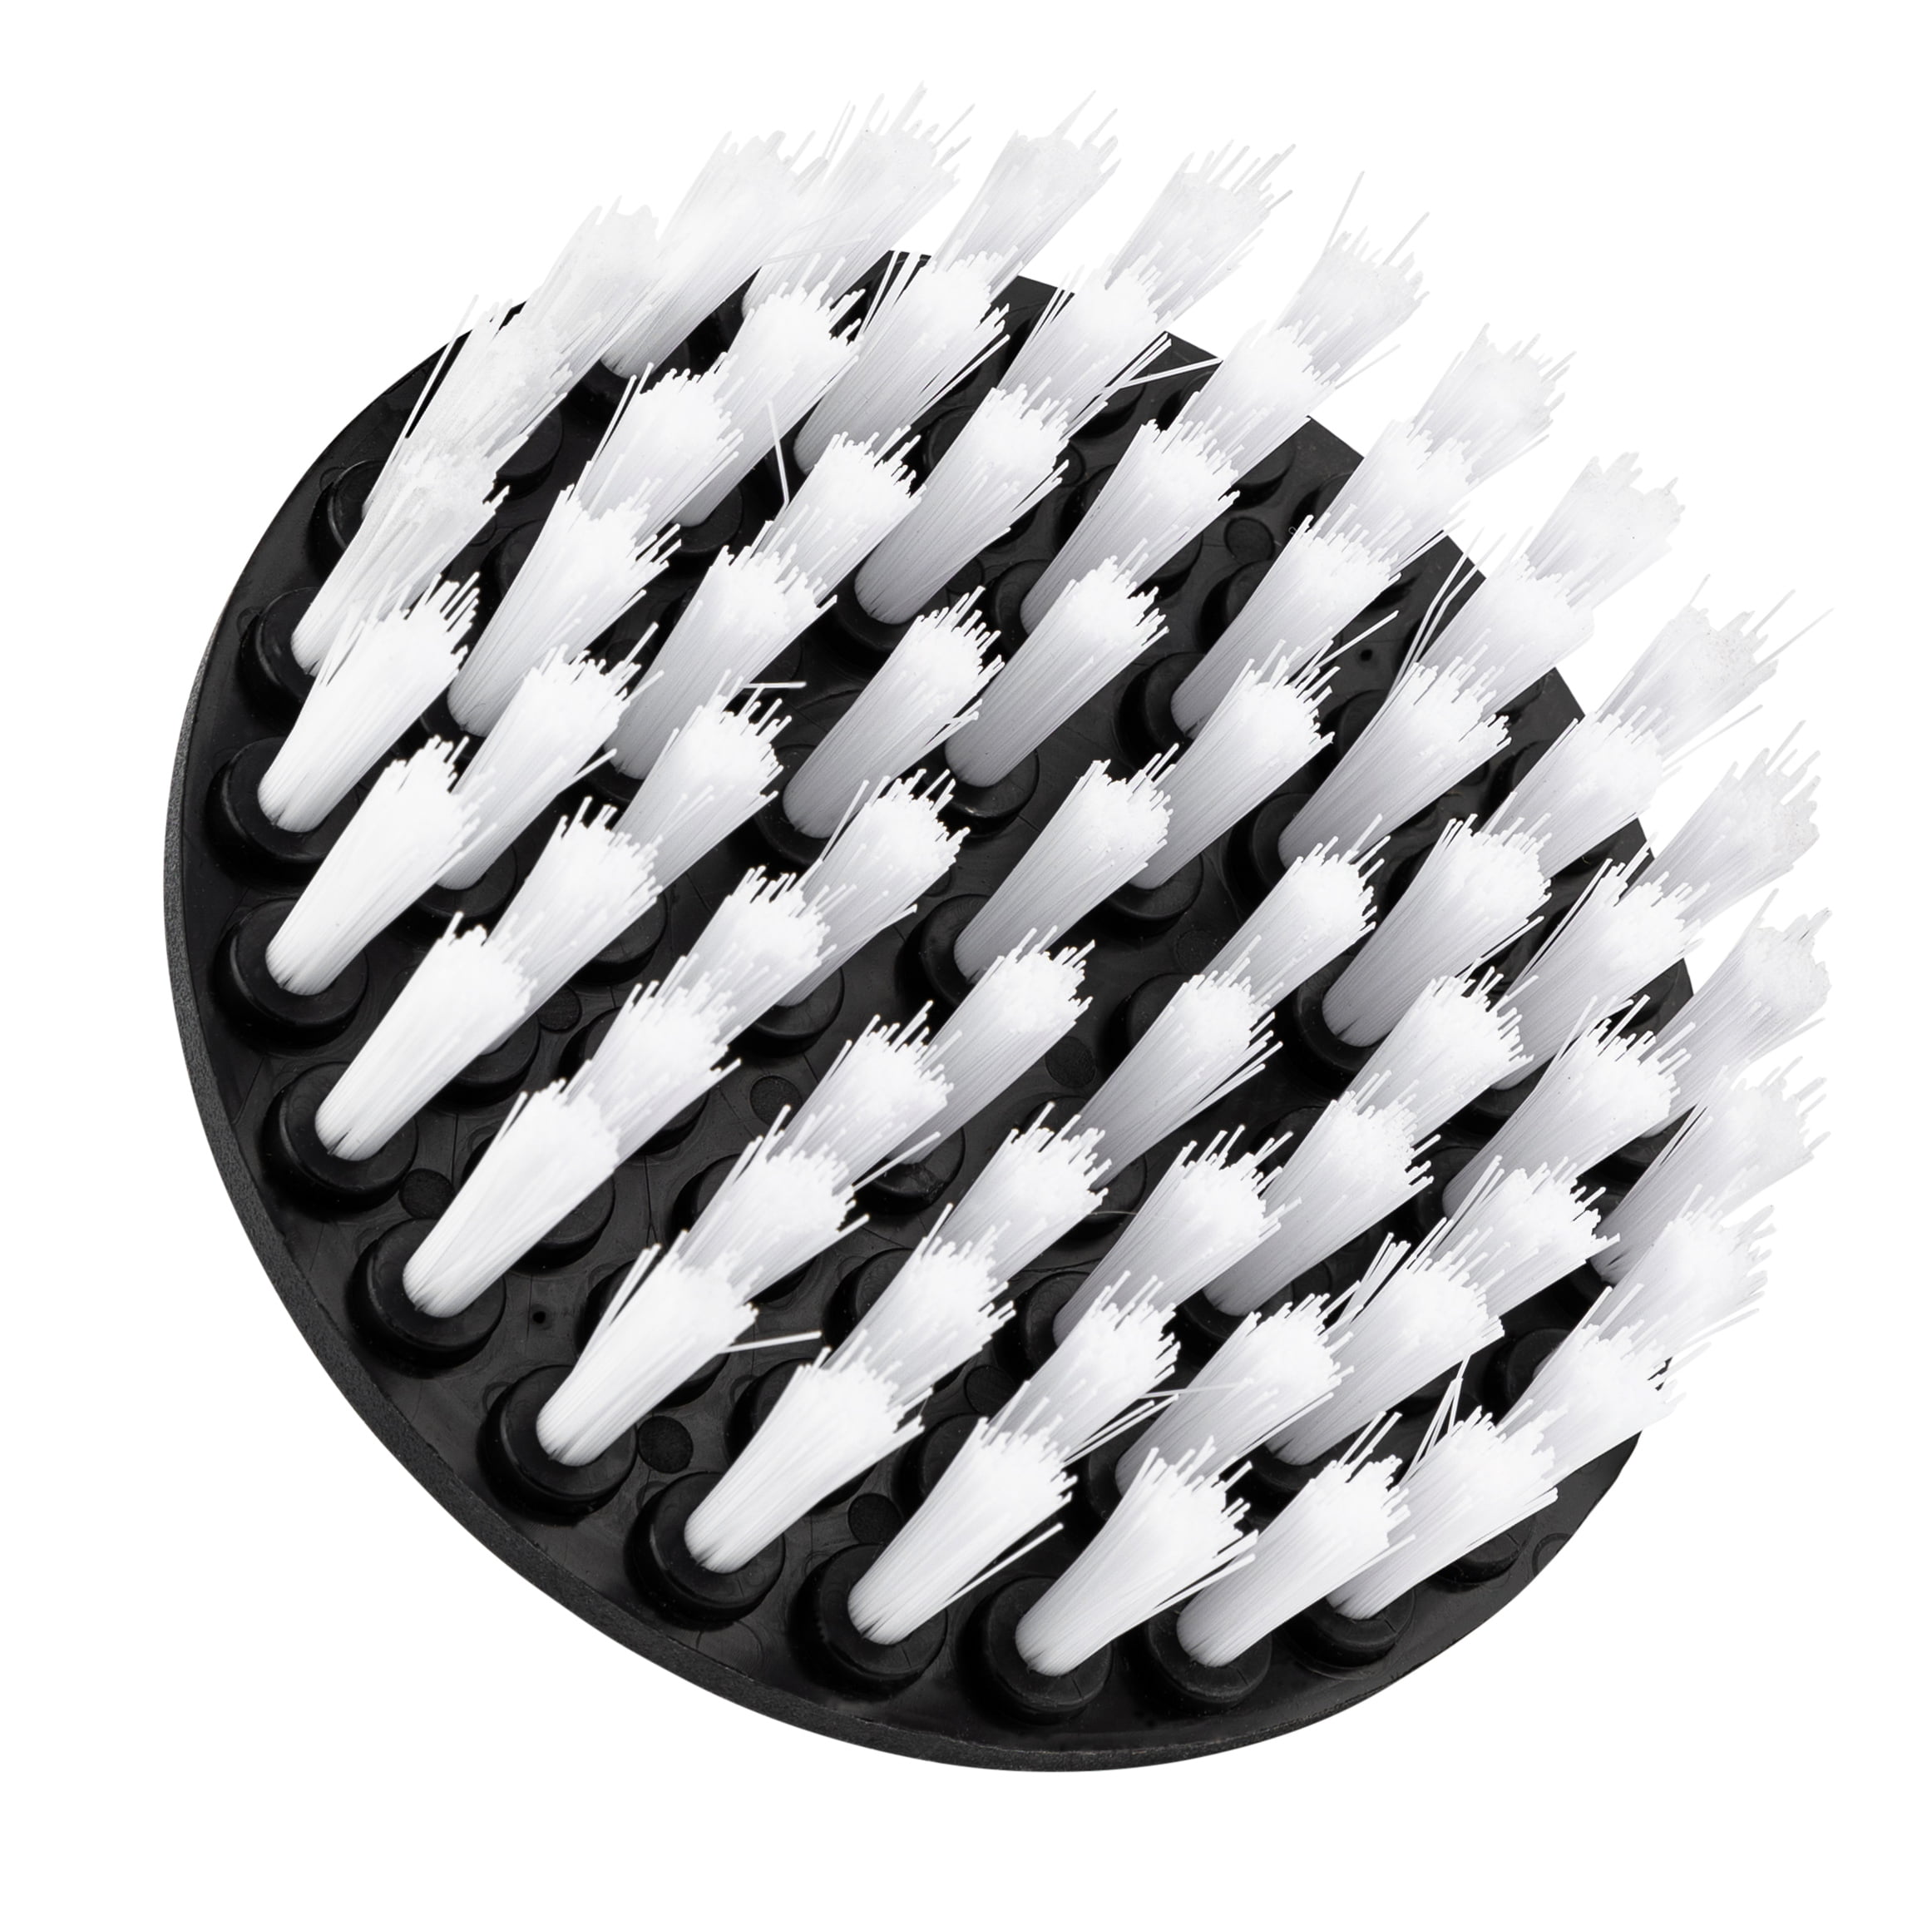 60mm Soft Power Drill Bristle Brush Head White For Cleaning Car